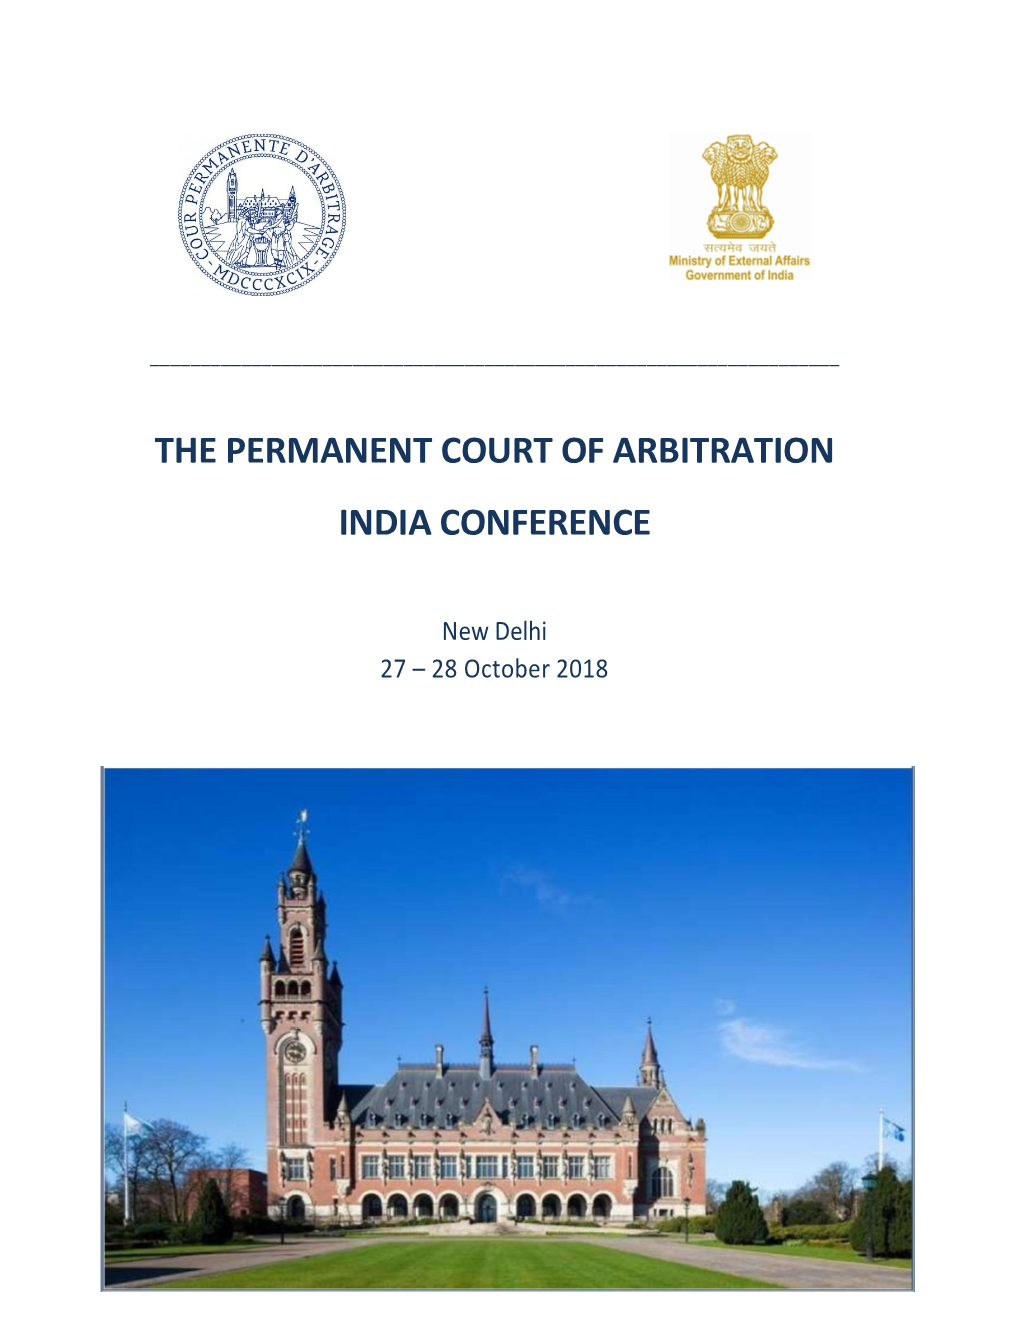 The Permanent Court of Arbitration India Conference